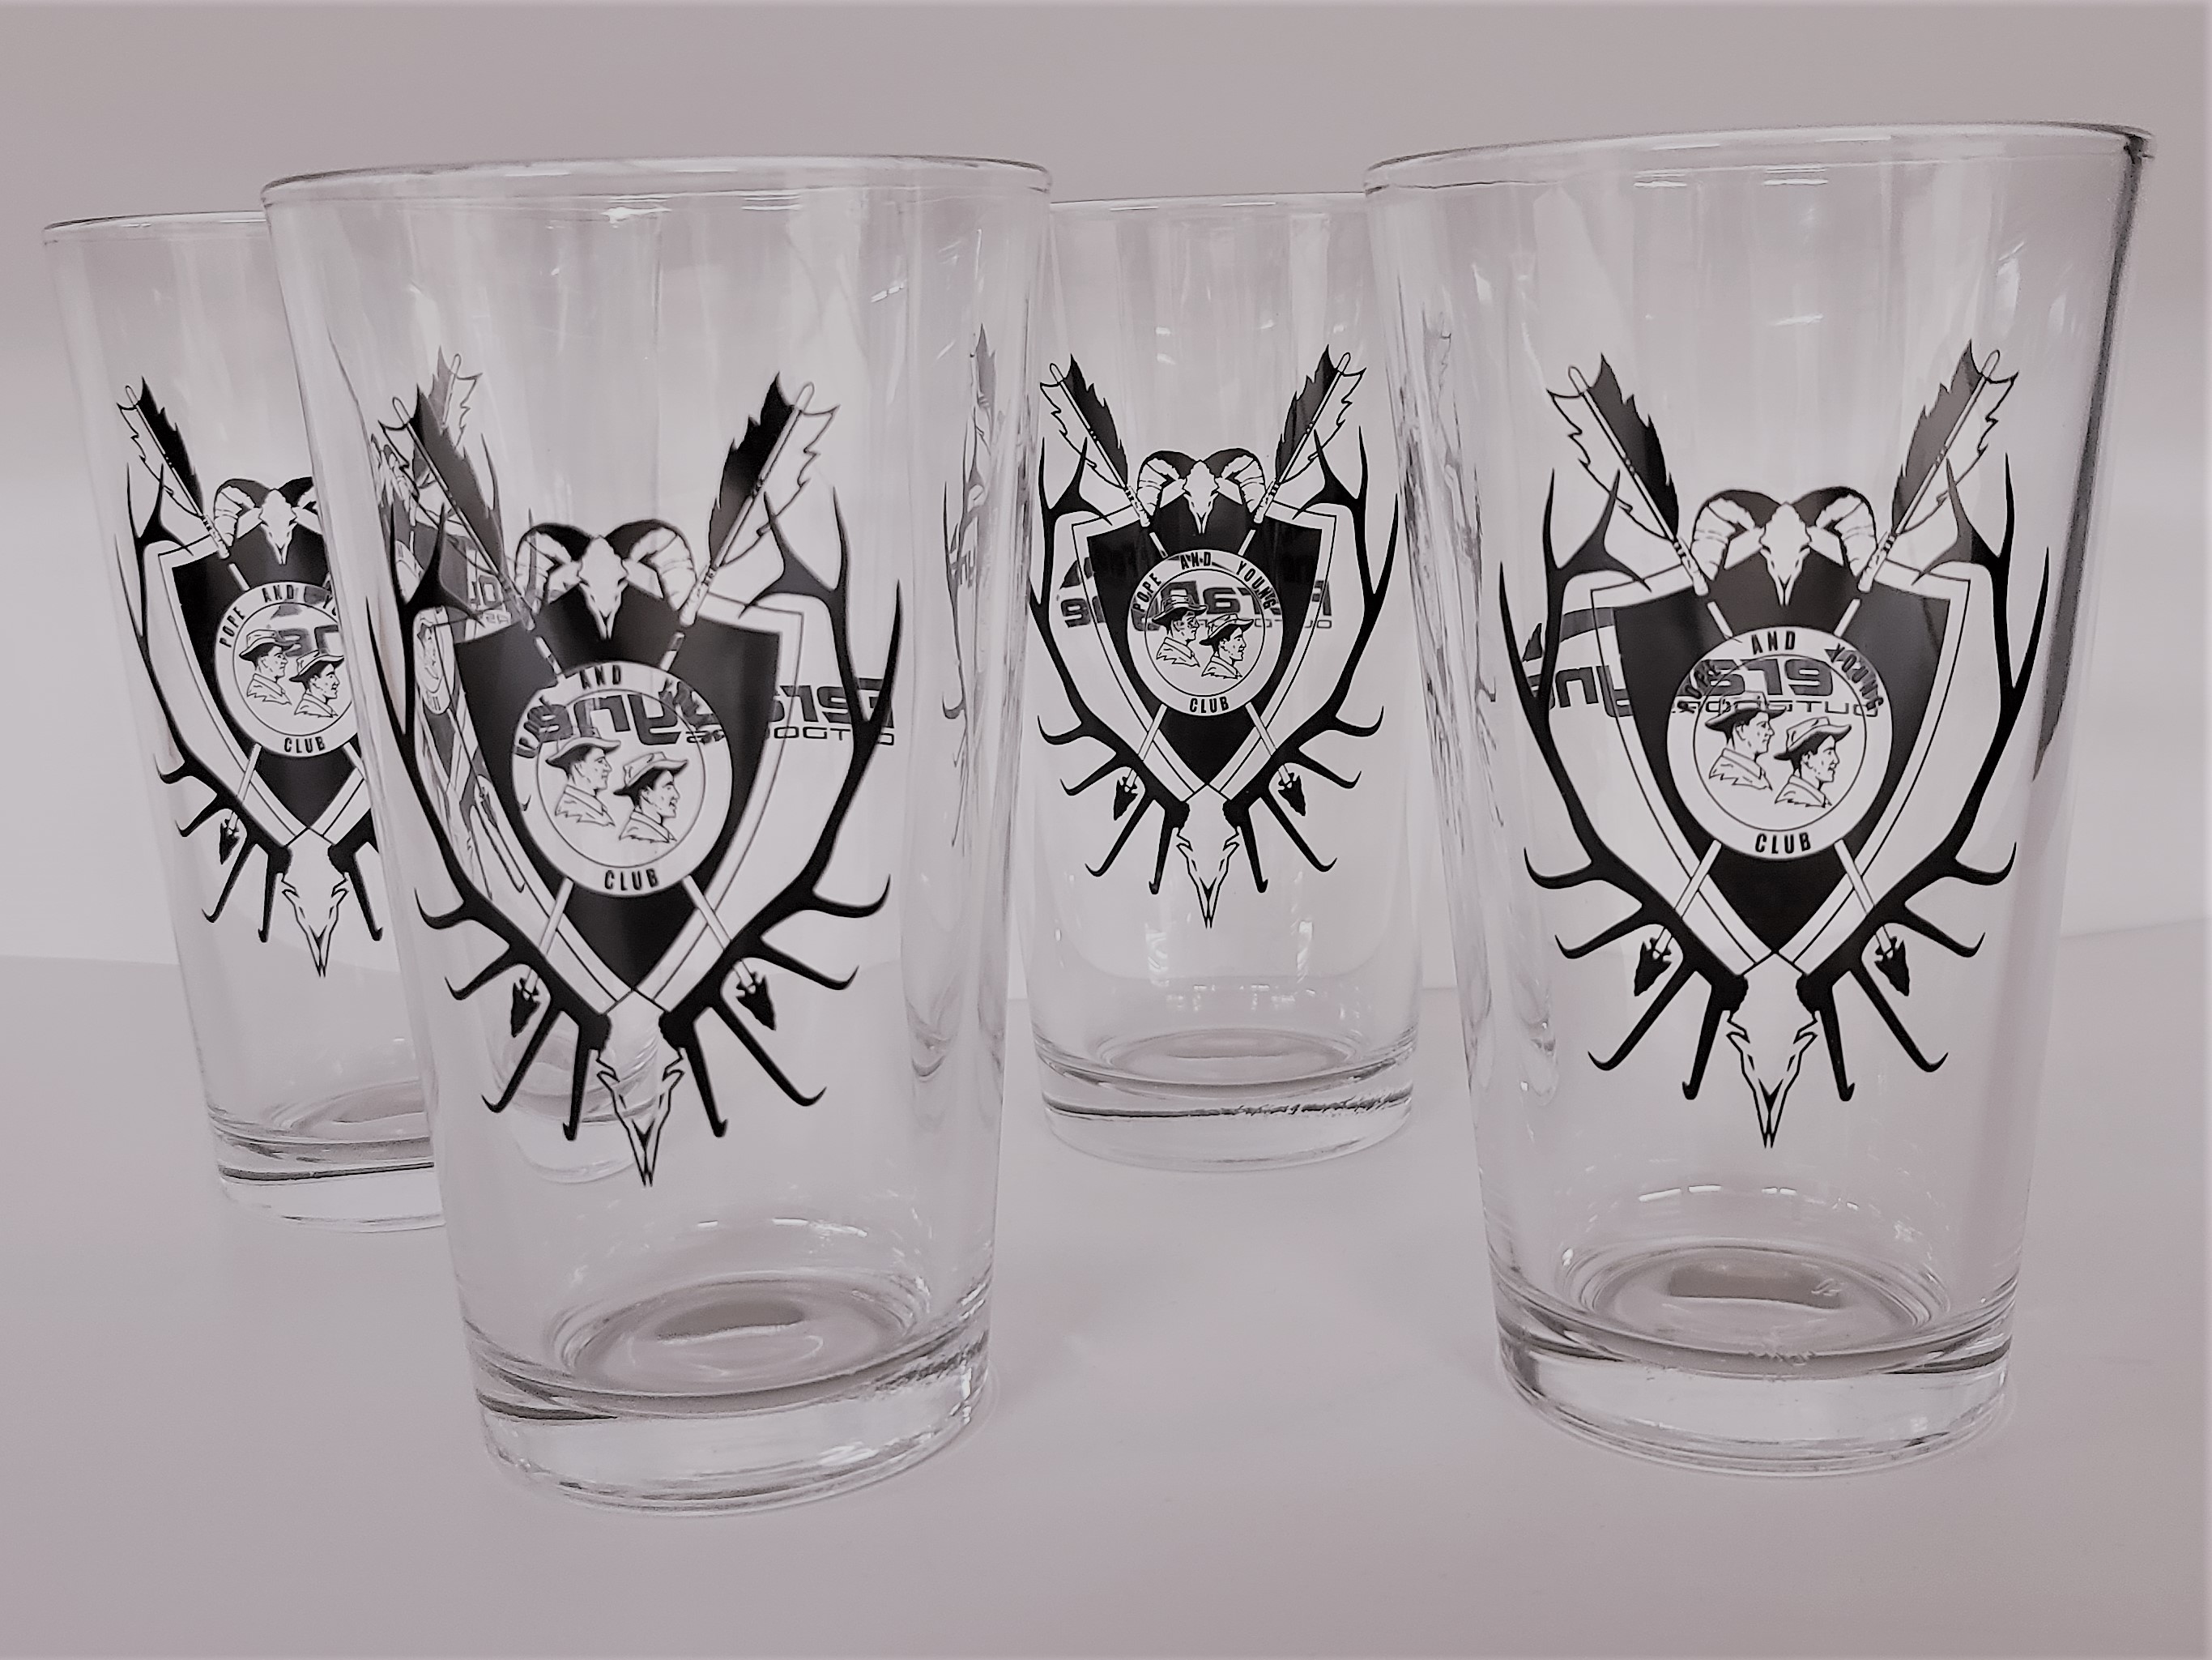 
Pope & Young Pint Glass Set of 4